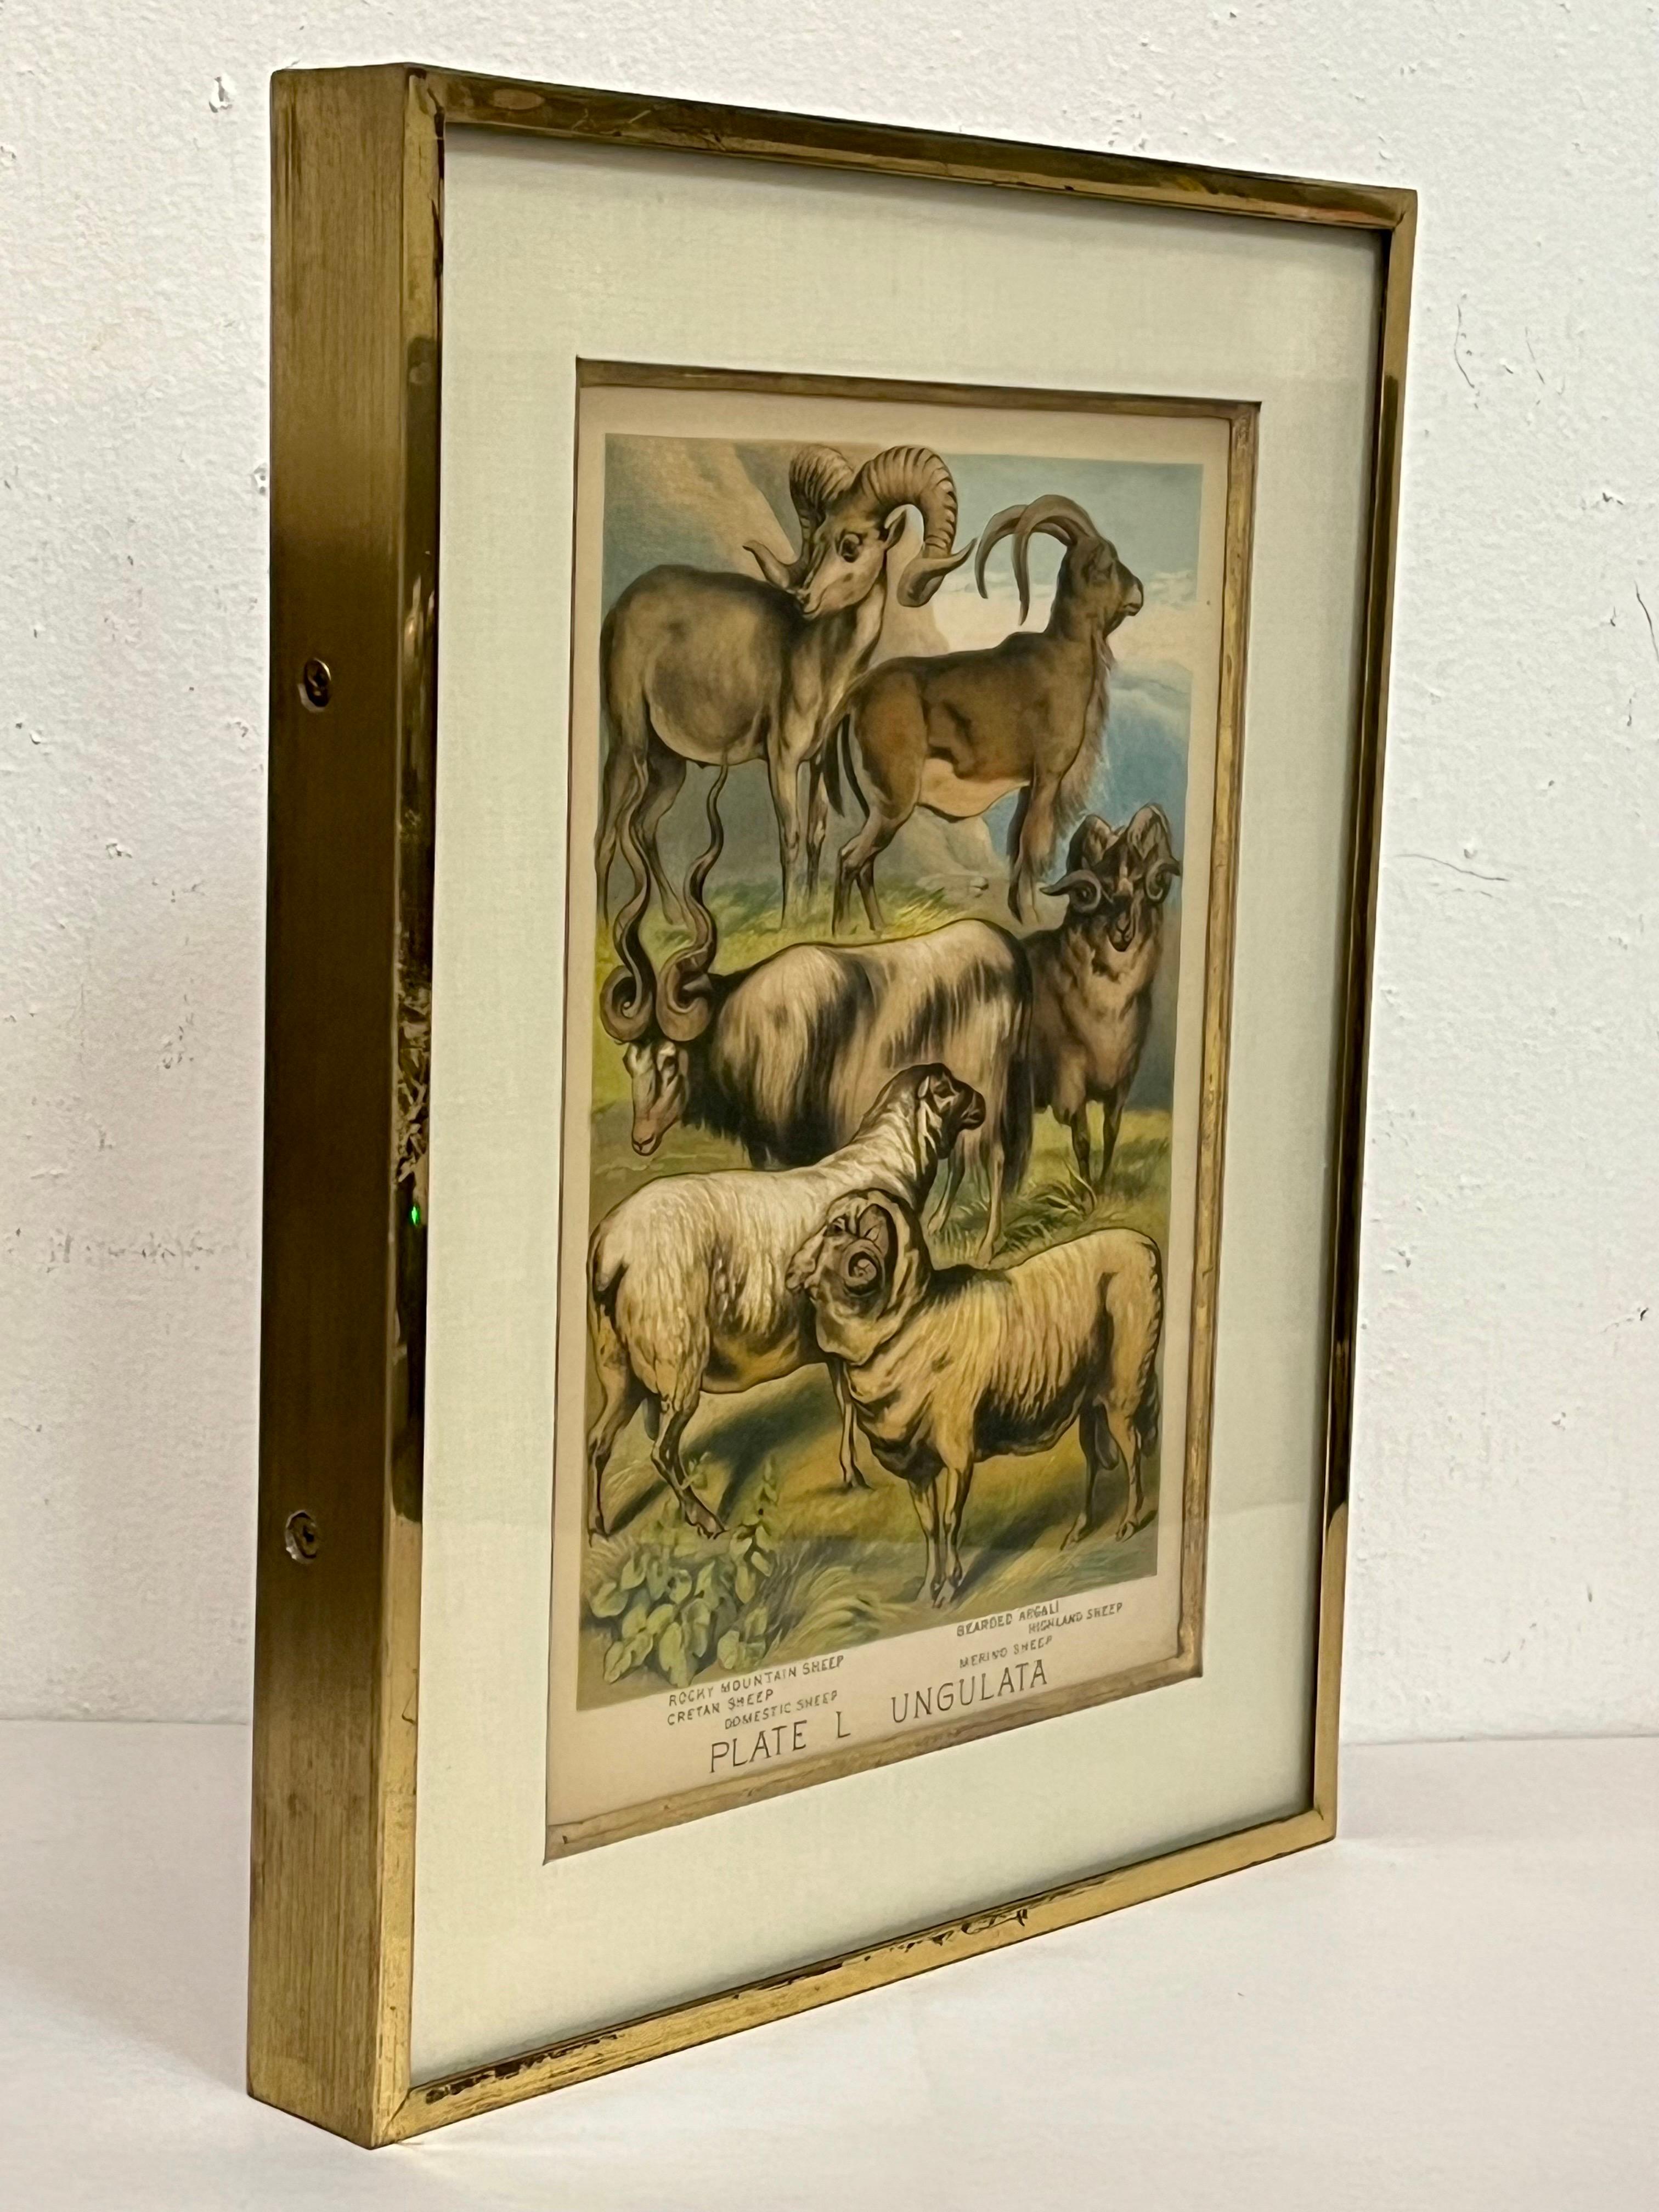 This is where the antique mixes with the modern. Where worlds collide and give rise to something fresh, new and unique. A mid 19th Century British print by Henry Johnson presented in a Kulicke frame which had its origins in the mid 20th Century in